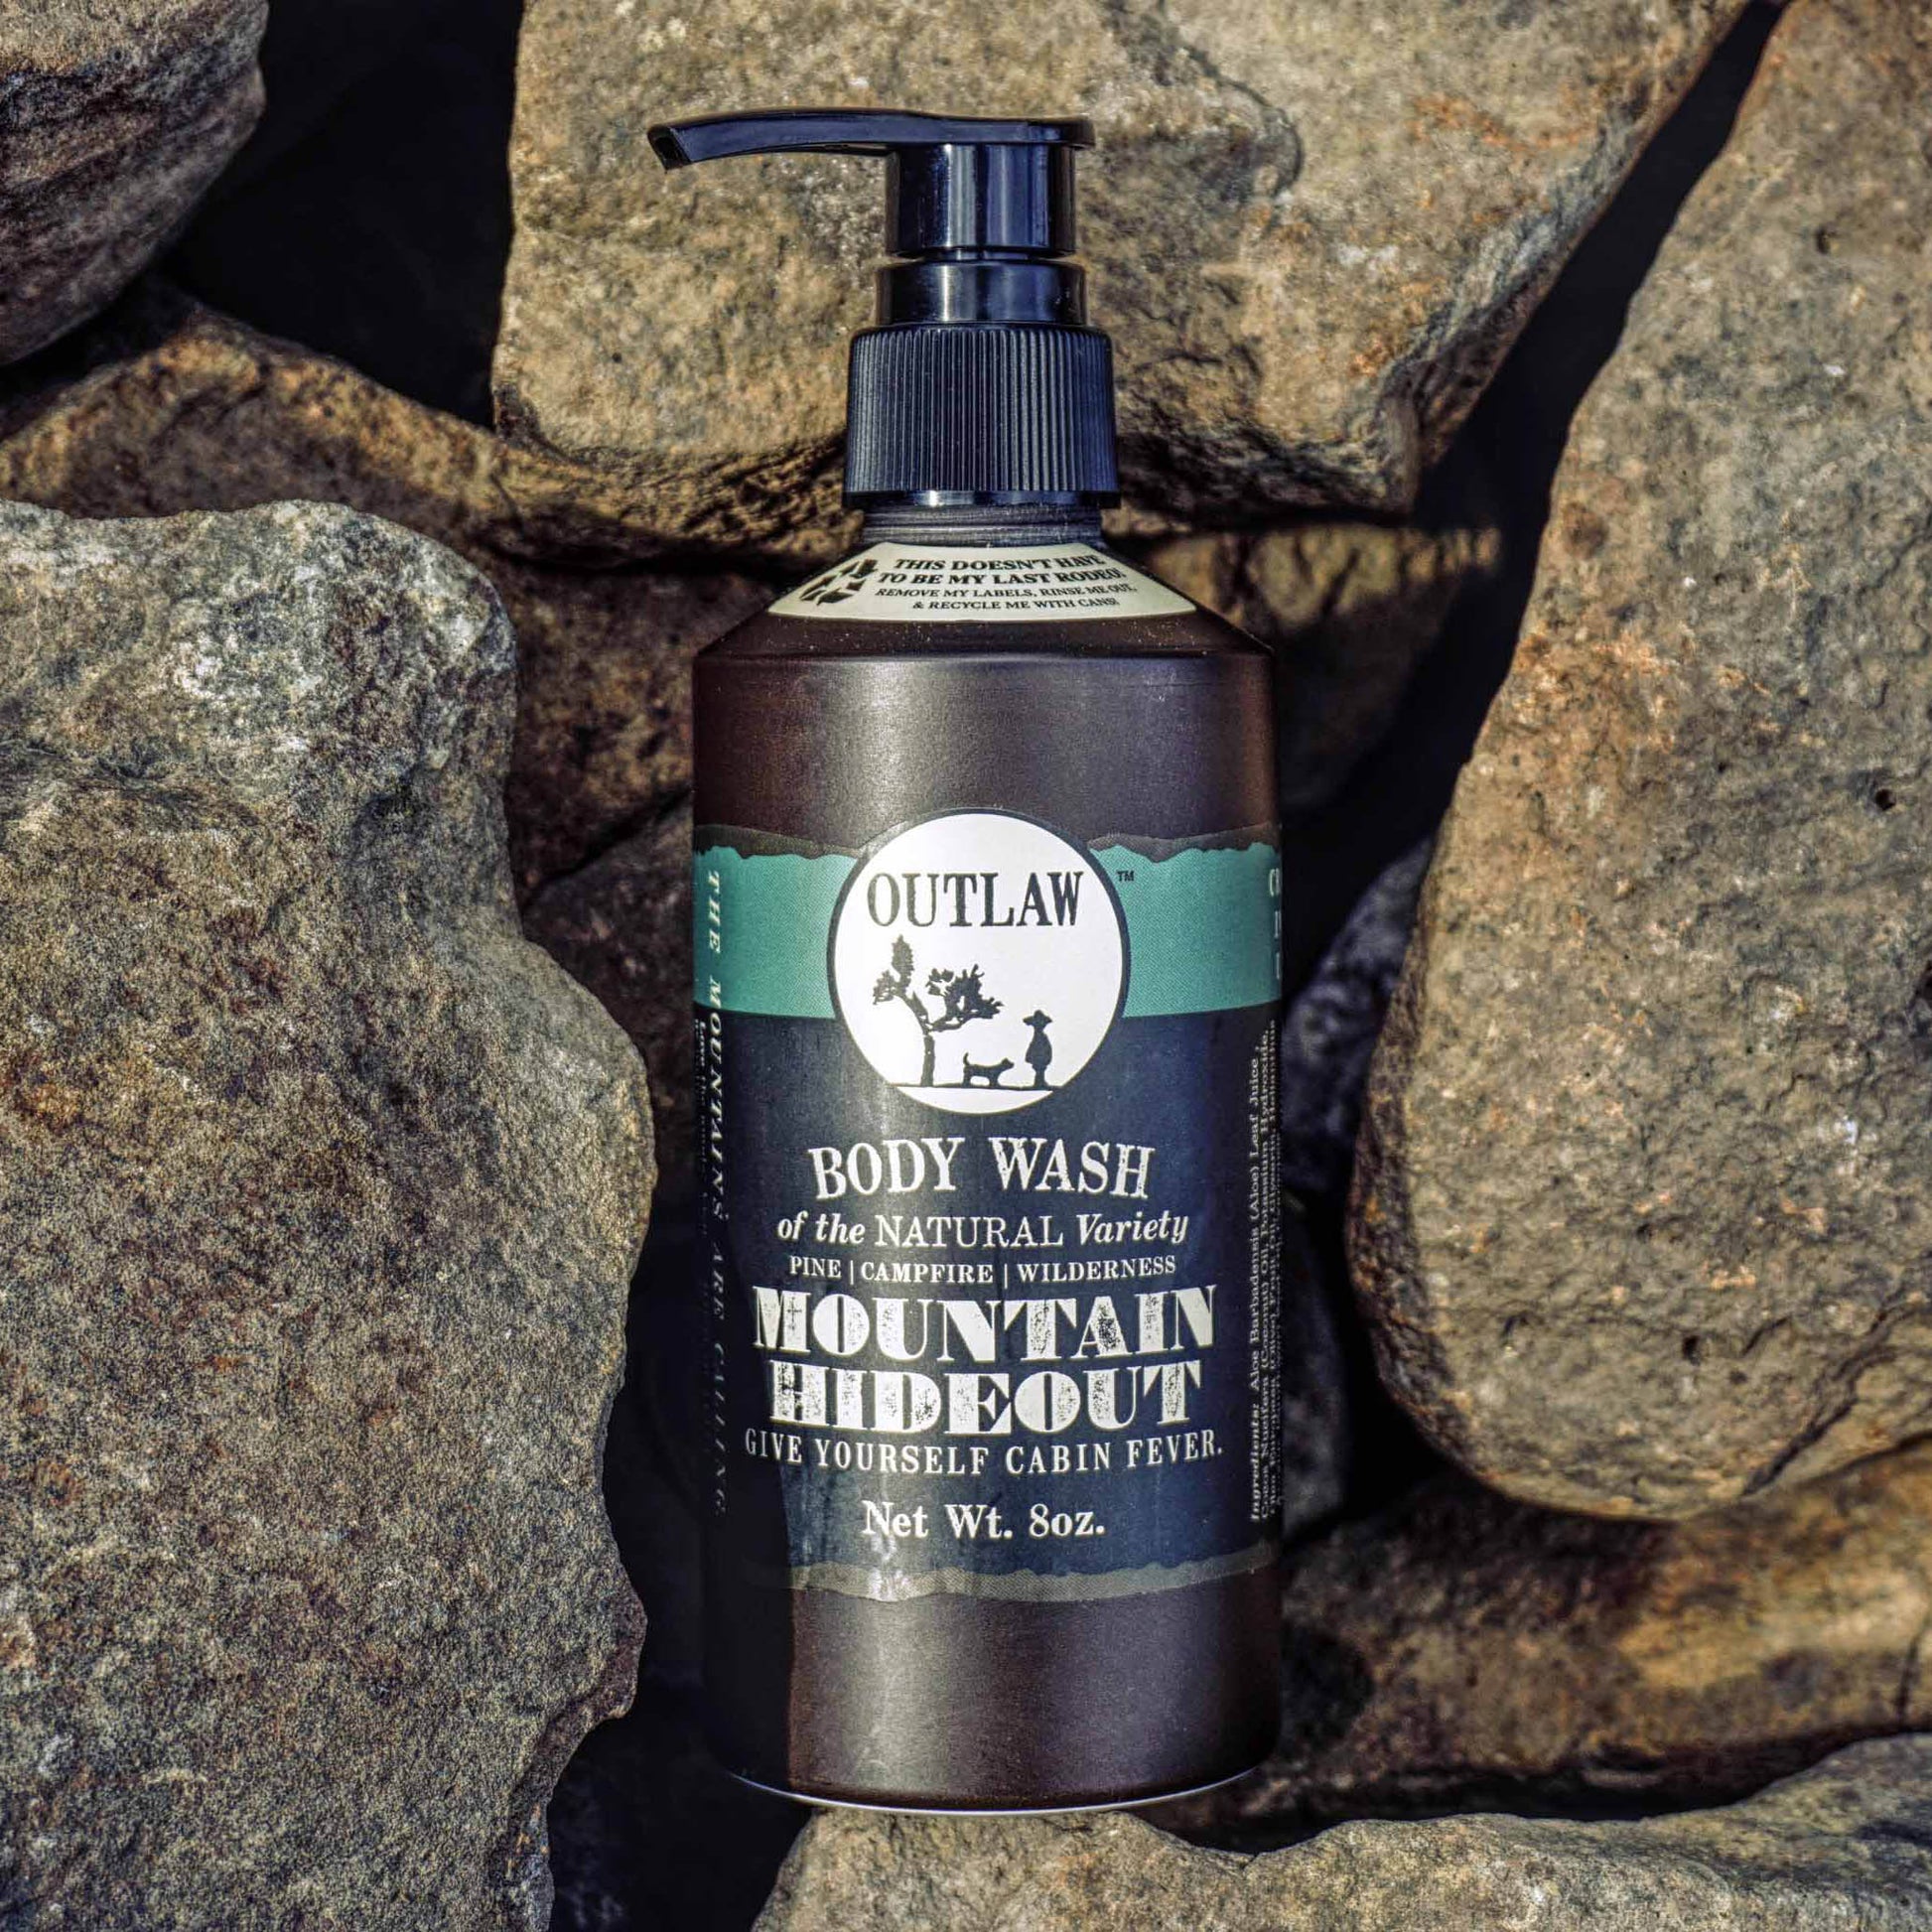 Natural body wash with Mountain Hideout pine and campfire scent by Outlaw